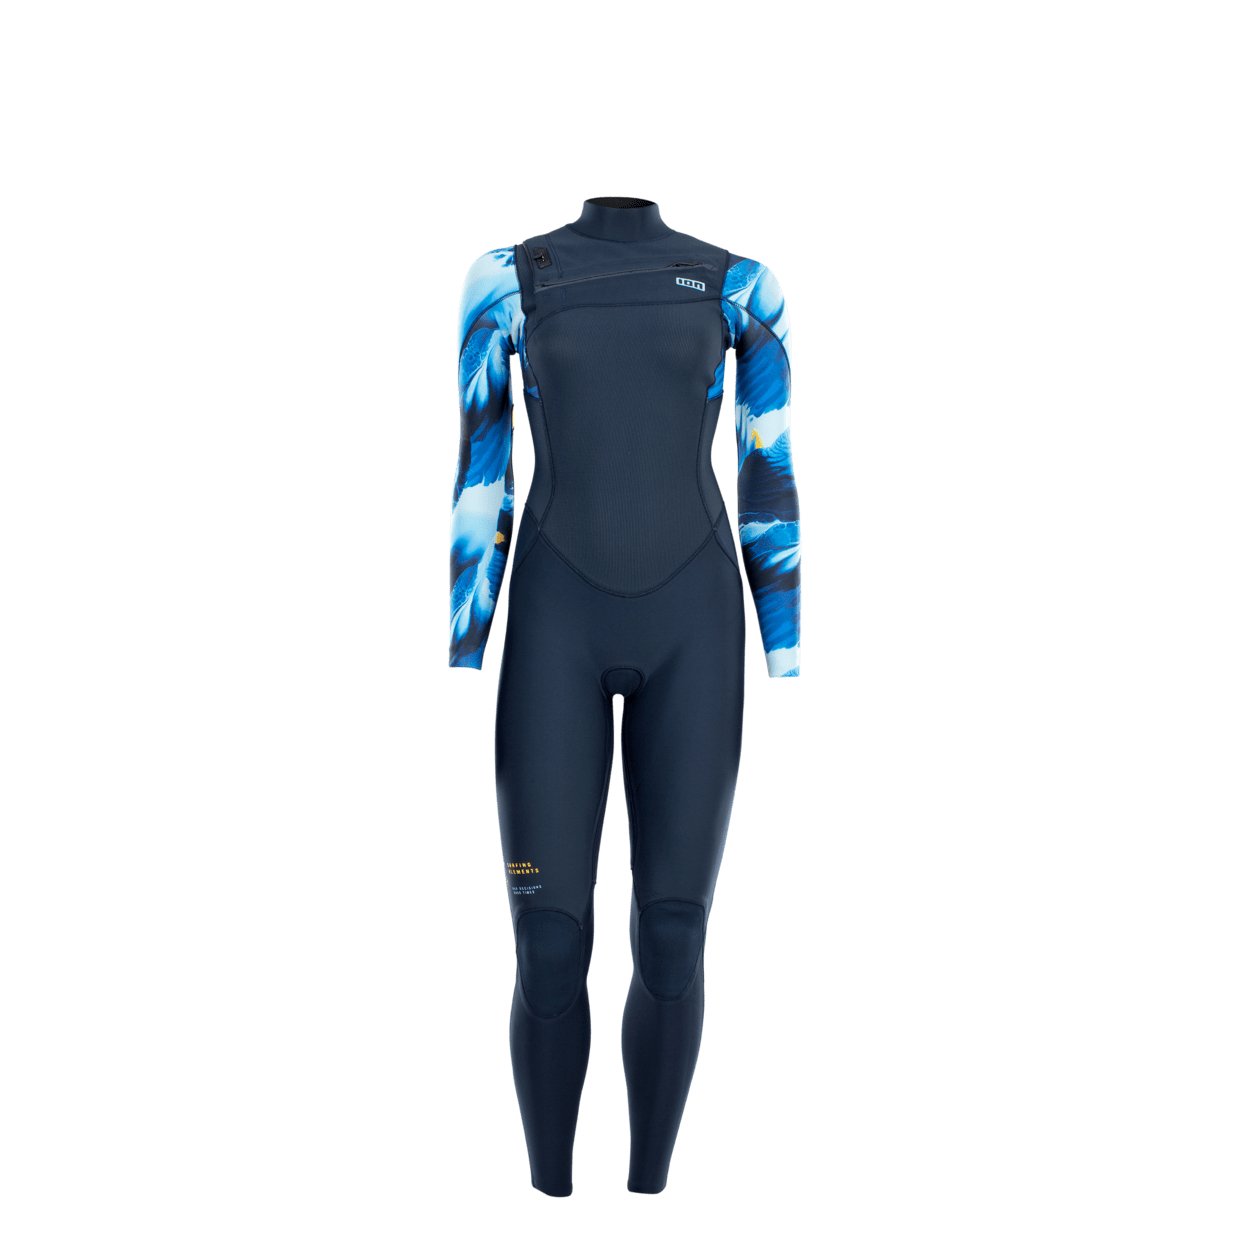 ION Amaze Amp Semidry 4/3 FZ DL 2021 - Worthing Watersports - 9008415955909 - Wetsuits - ION Water